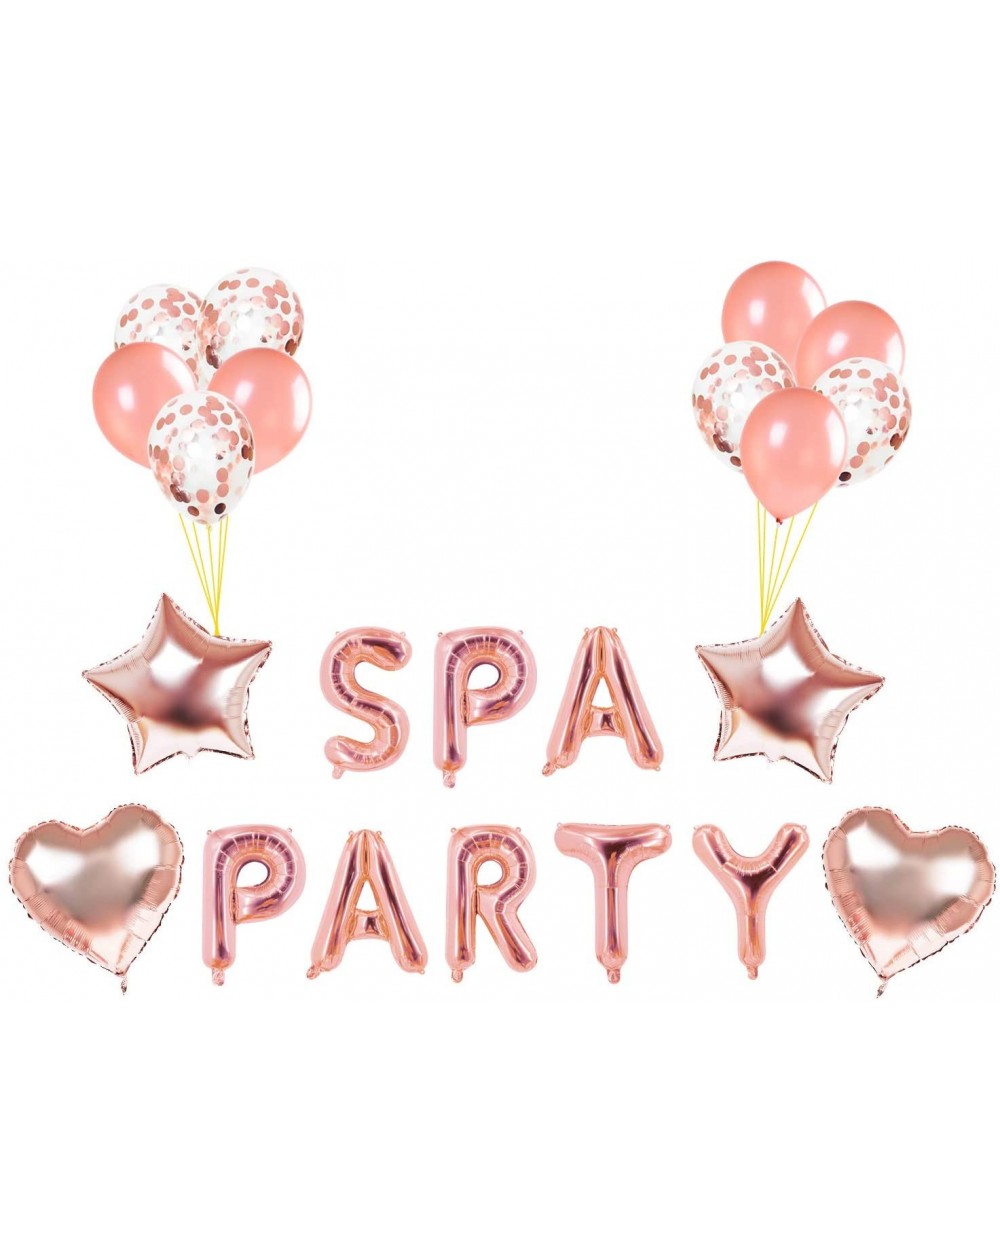 Balloons SPA Party Foil Balloon with Latex Balloons Make Up Day Girl Birthday Party Decoration - CS190OT8M7U $10.79